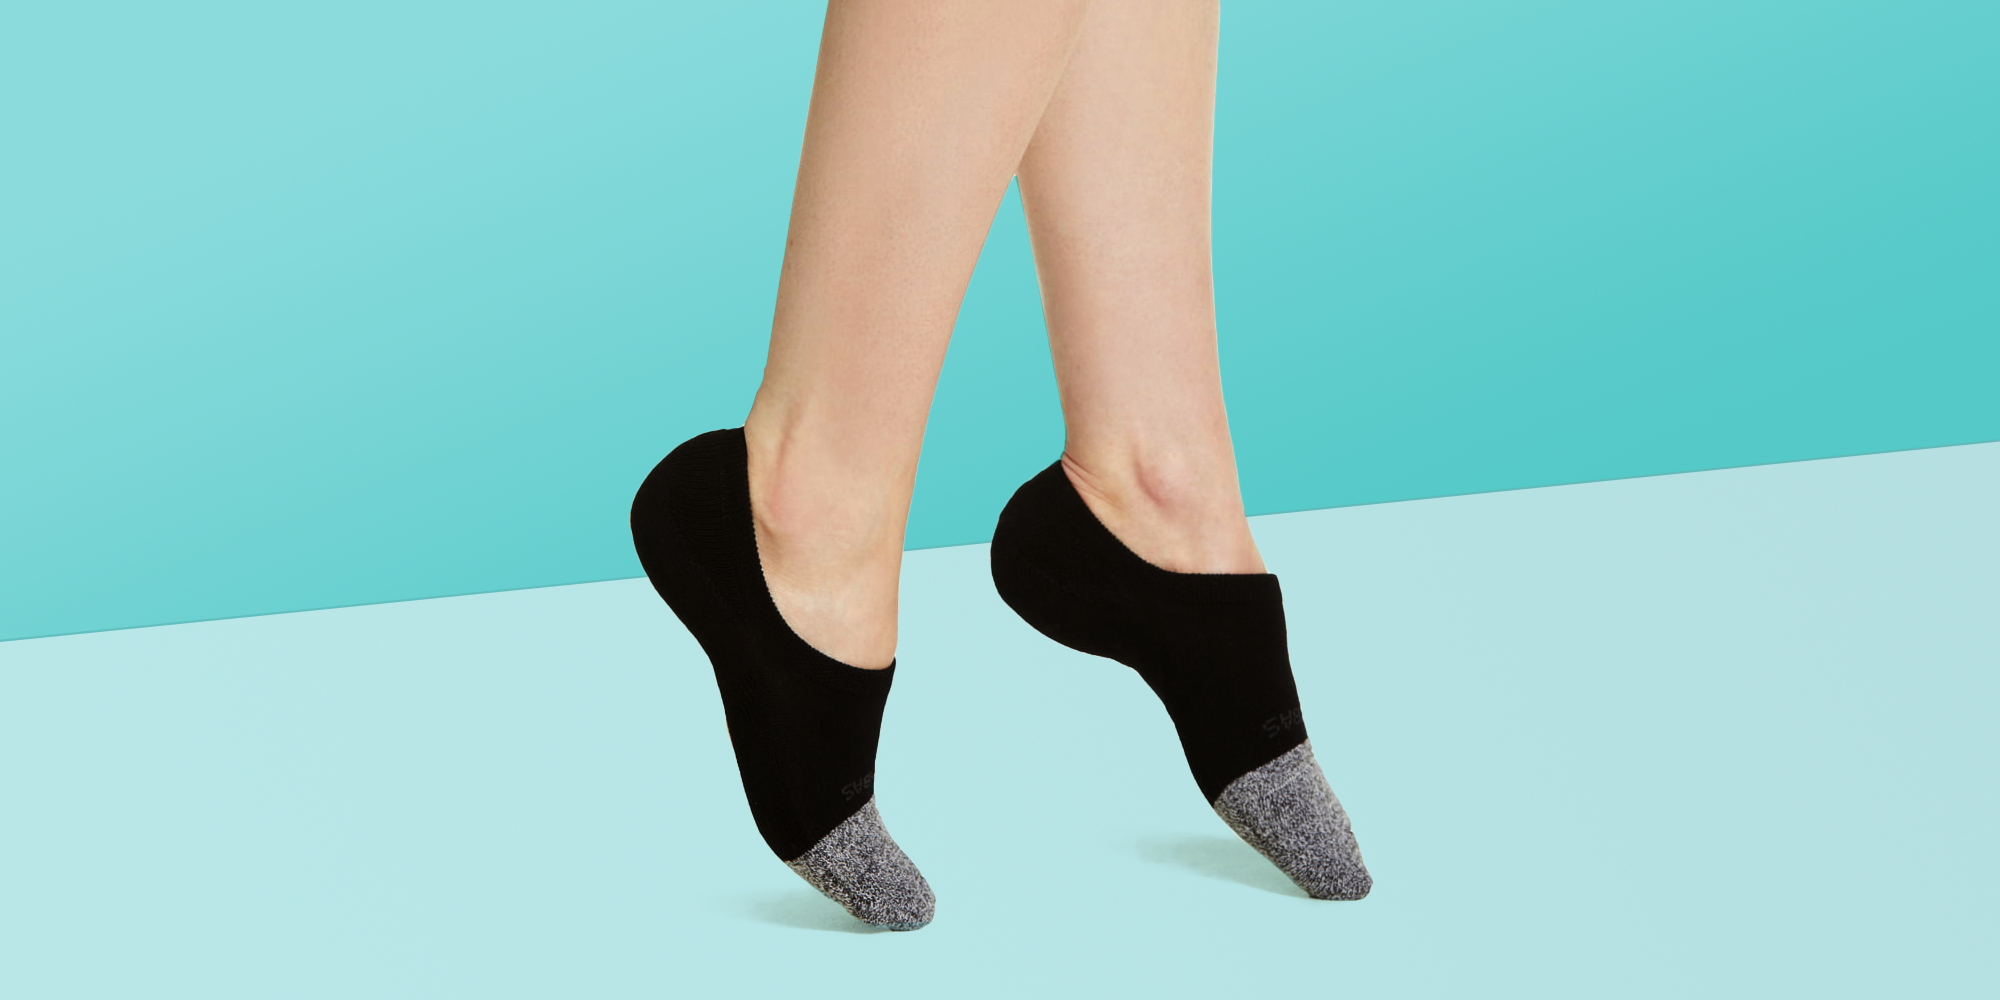 11 Best No-Show Socks 2021 - Top-Rated 